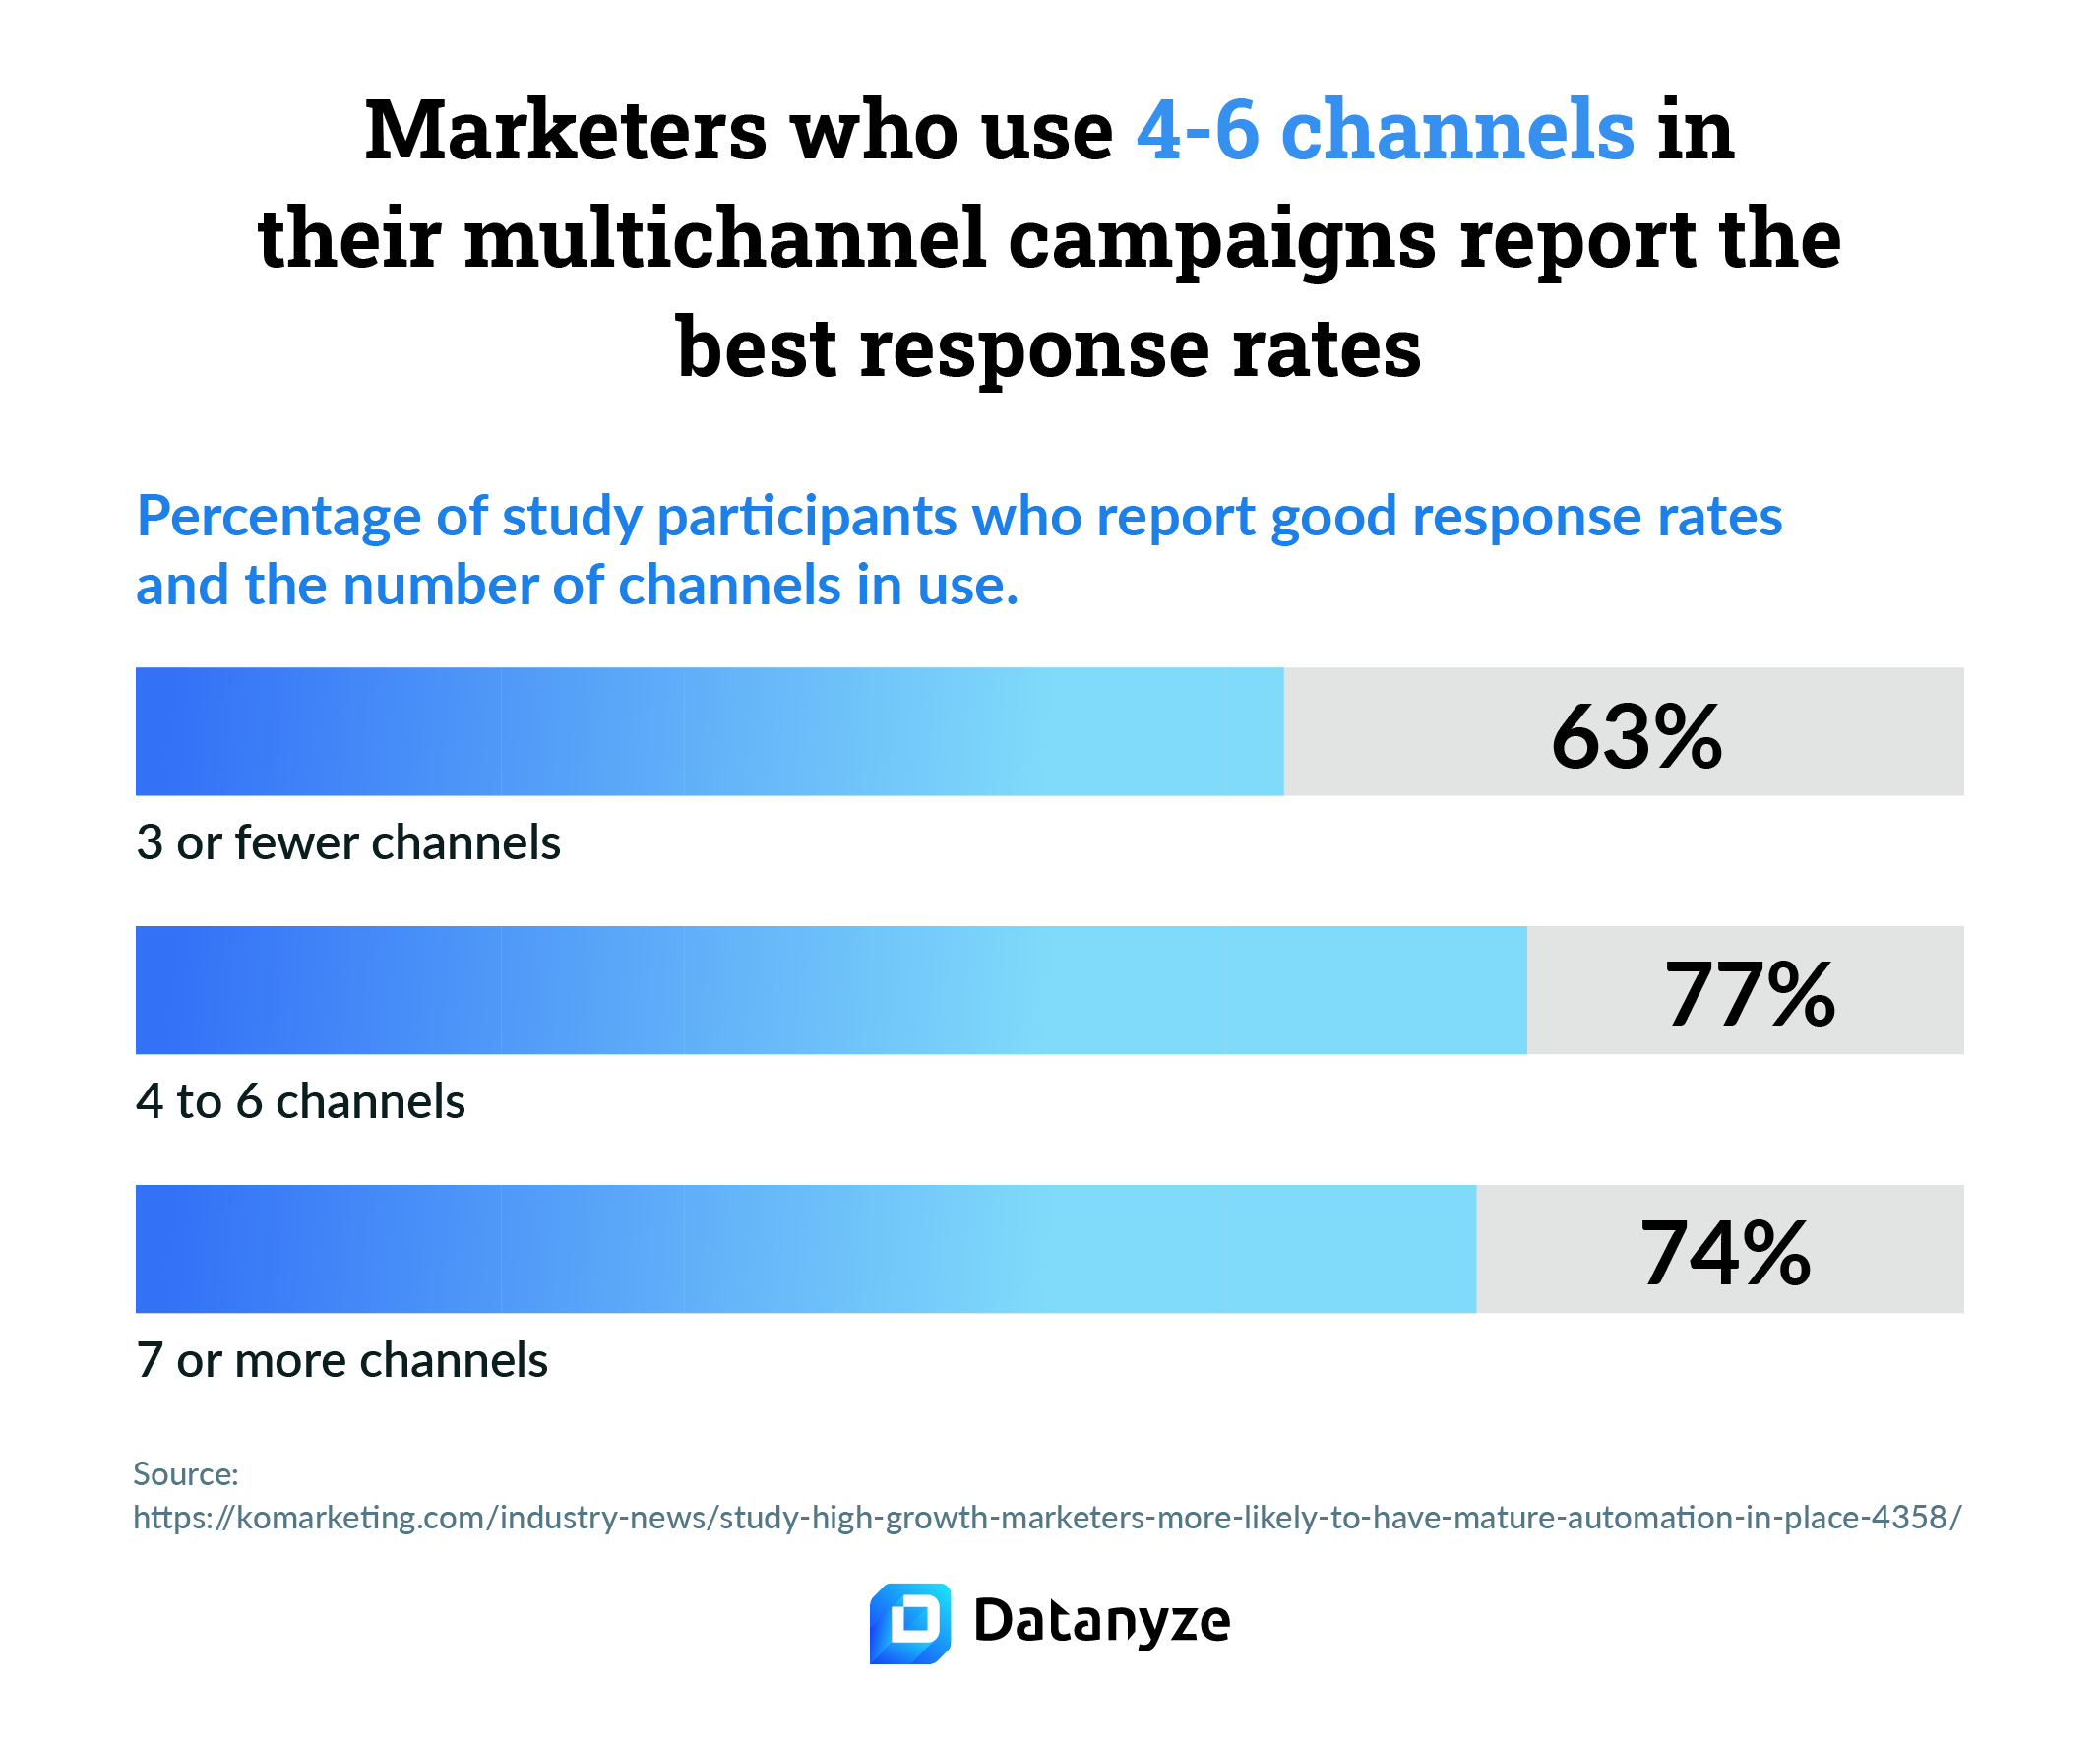 Marketers who use 4-6 channels in their multichannel campaigns report the best response rates